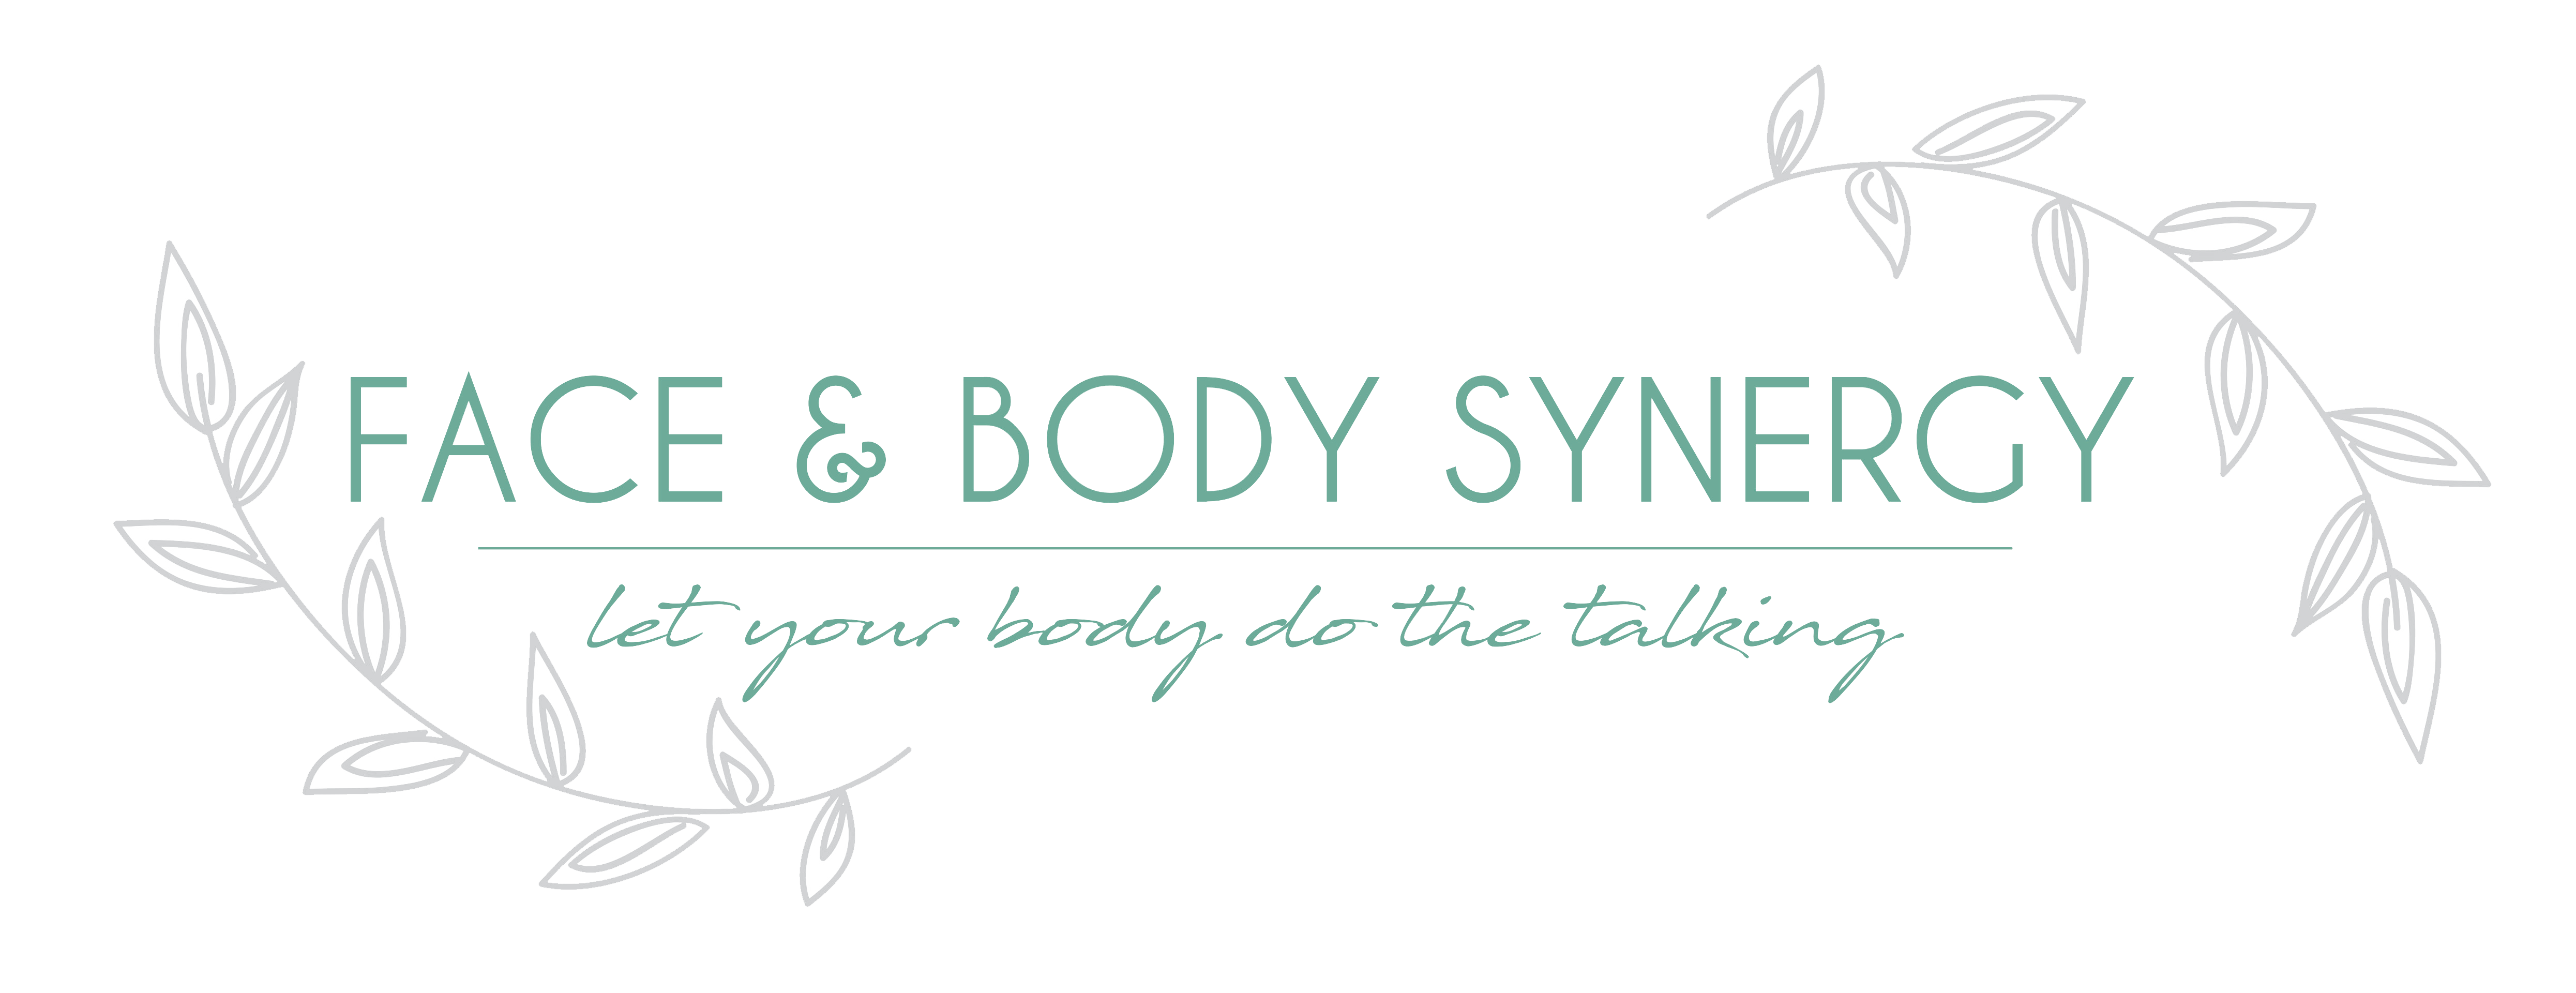 Face and Body Synergy Logo